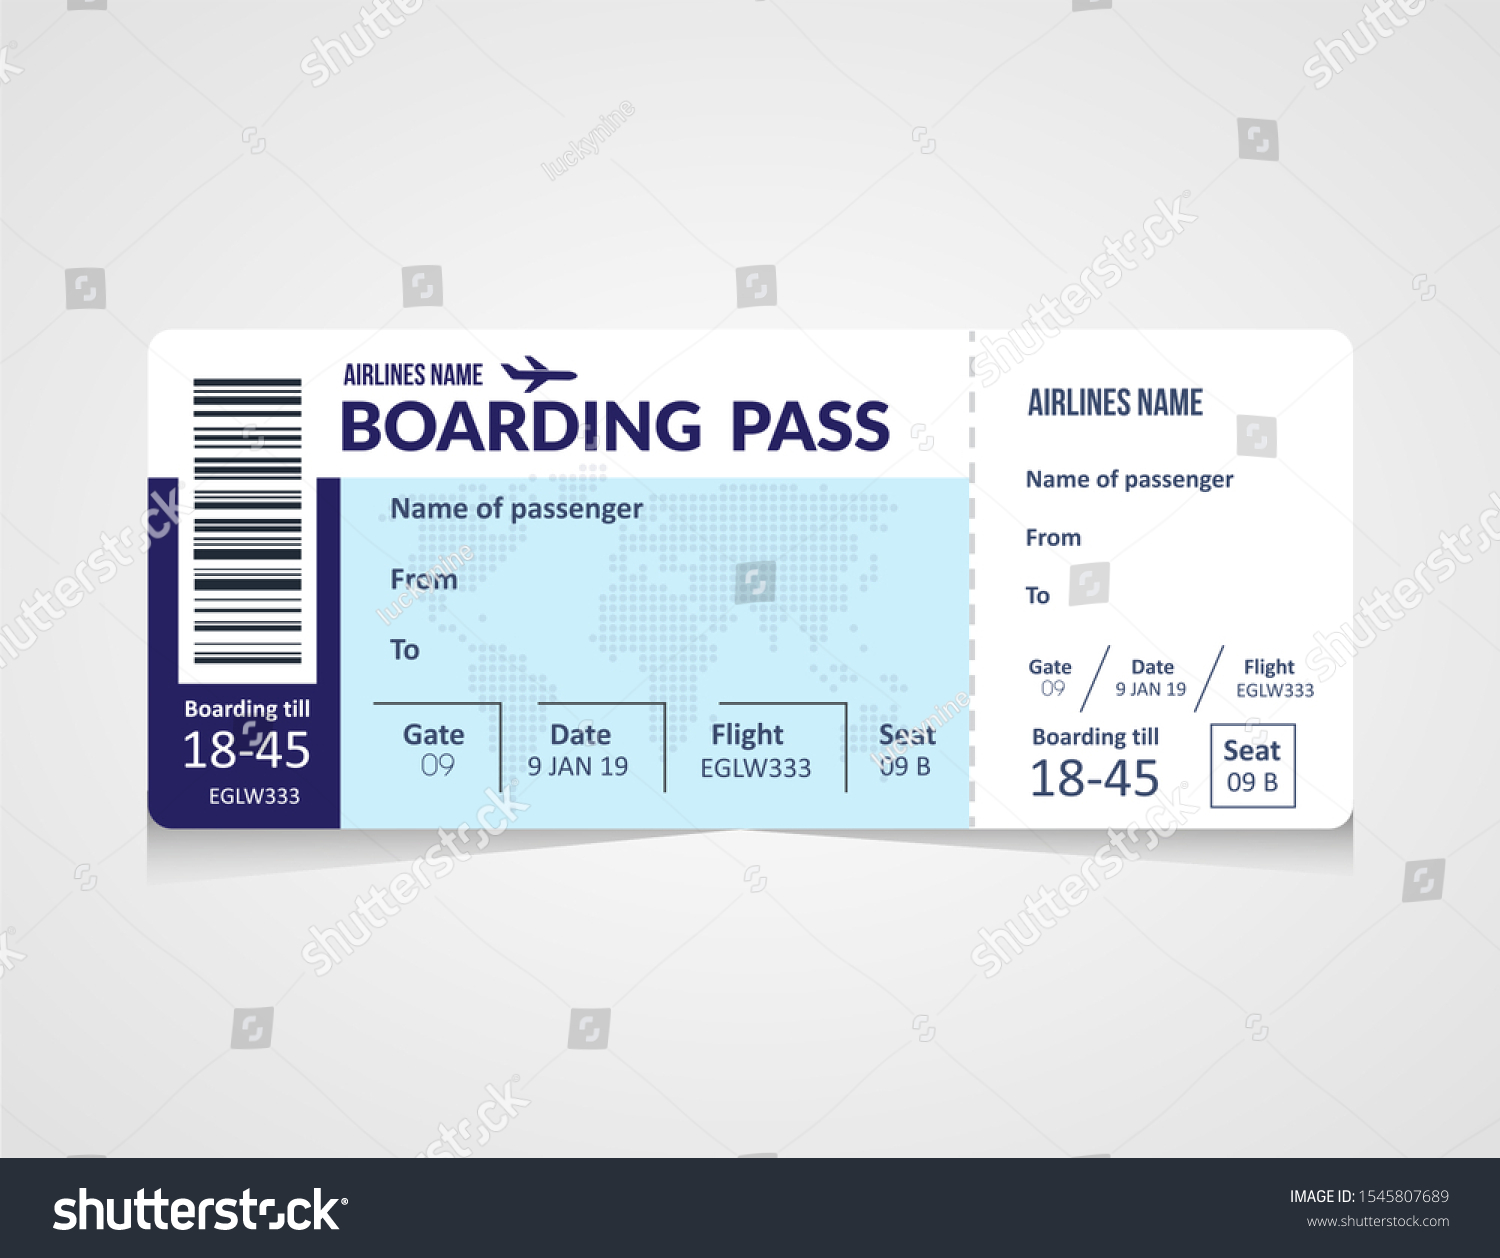 Plane Ticket Airline Boarding Pass Template Stock Vector Royalty Free 1545807689